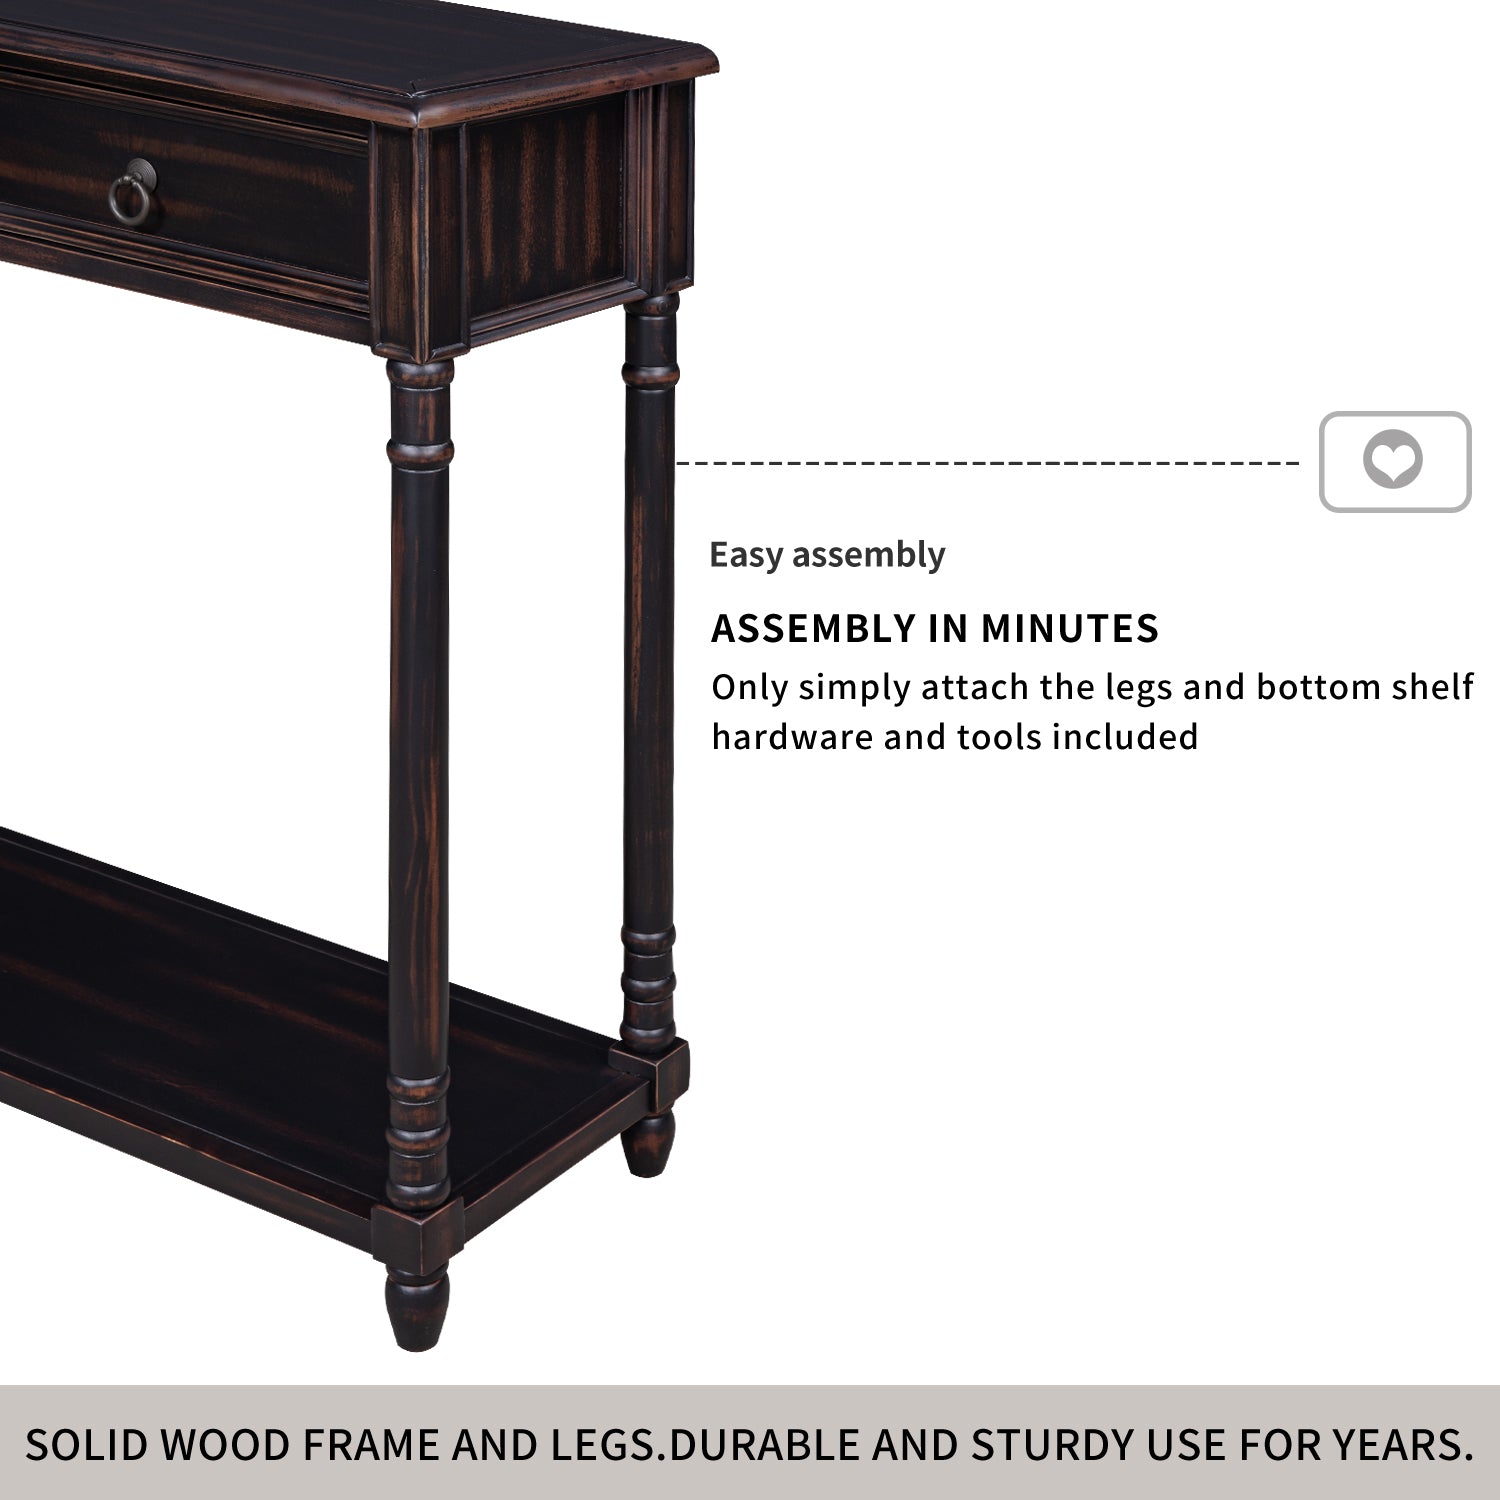 51" Console Table with Storage and Shelf, Sofa Table, accent cabinet, distressed black finish